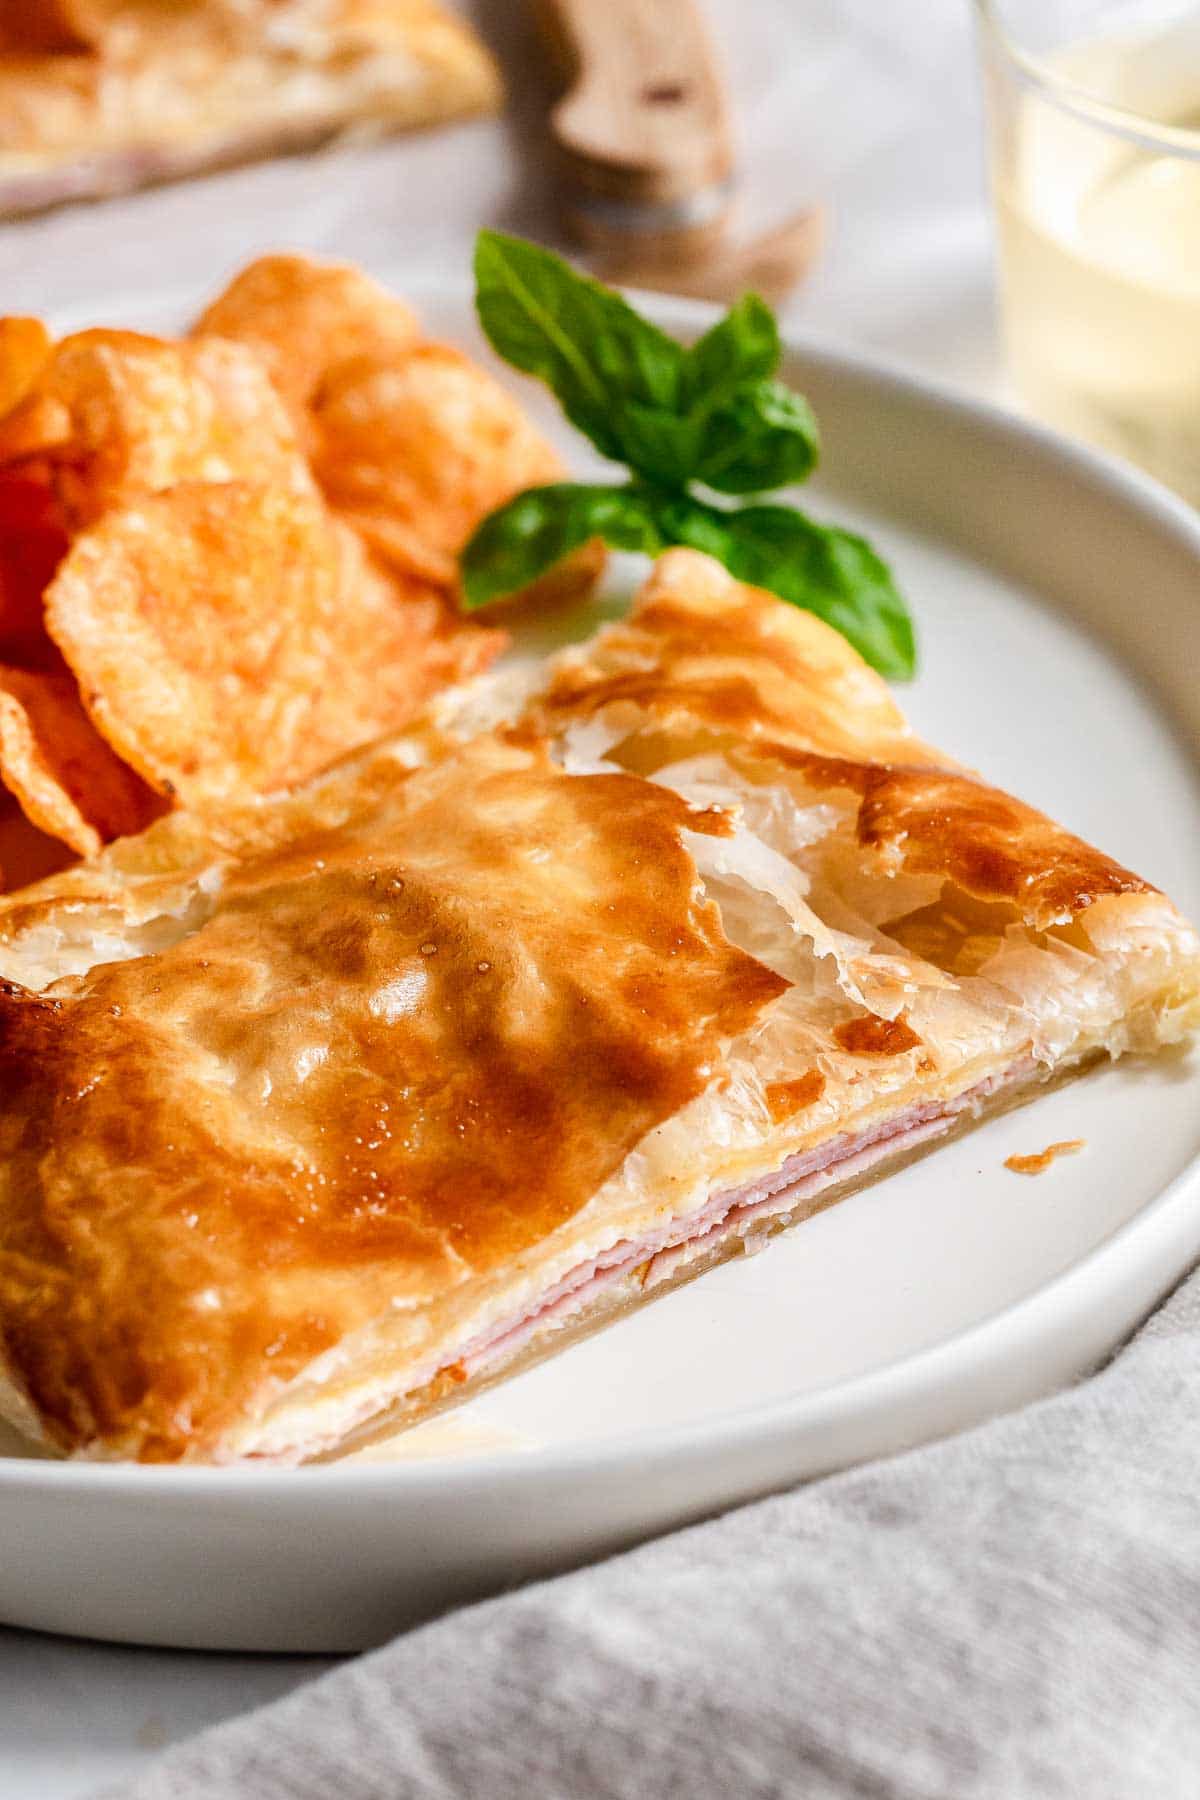 Ham and cheese pastry on plate.